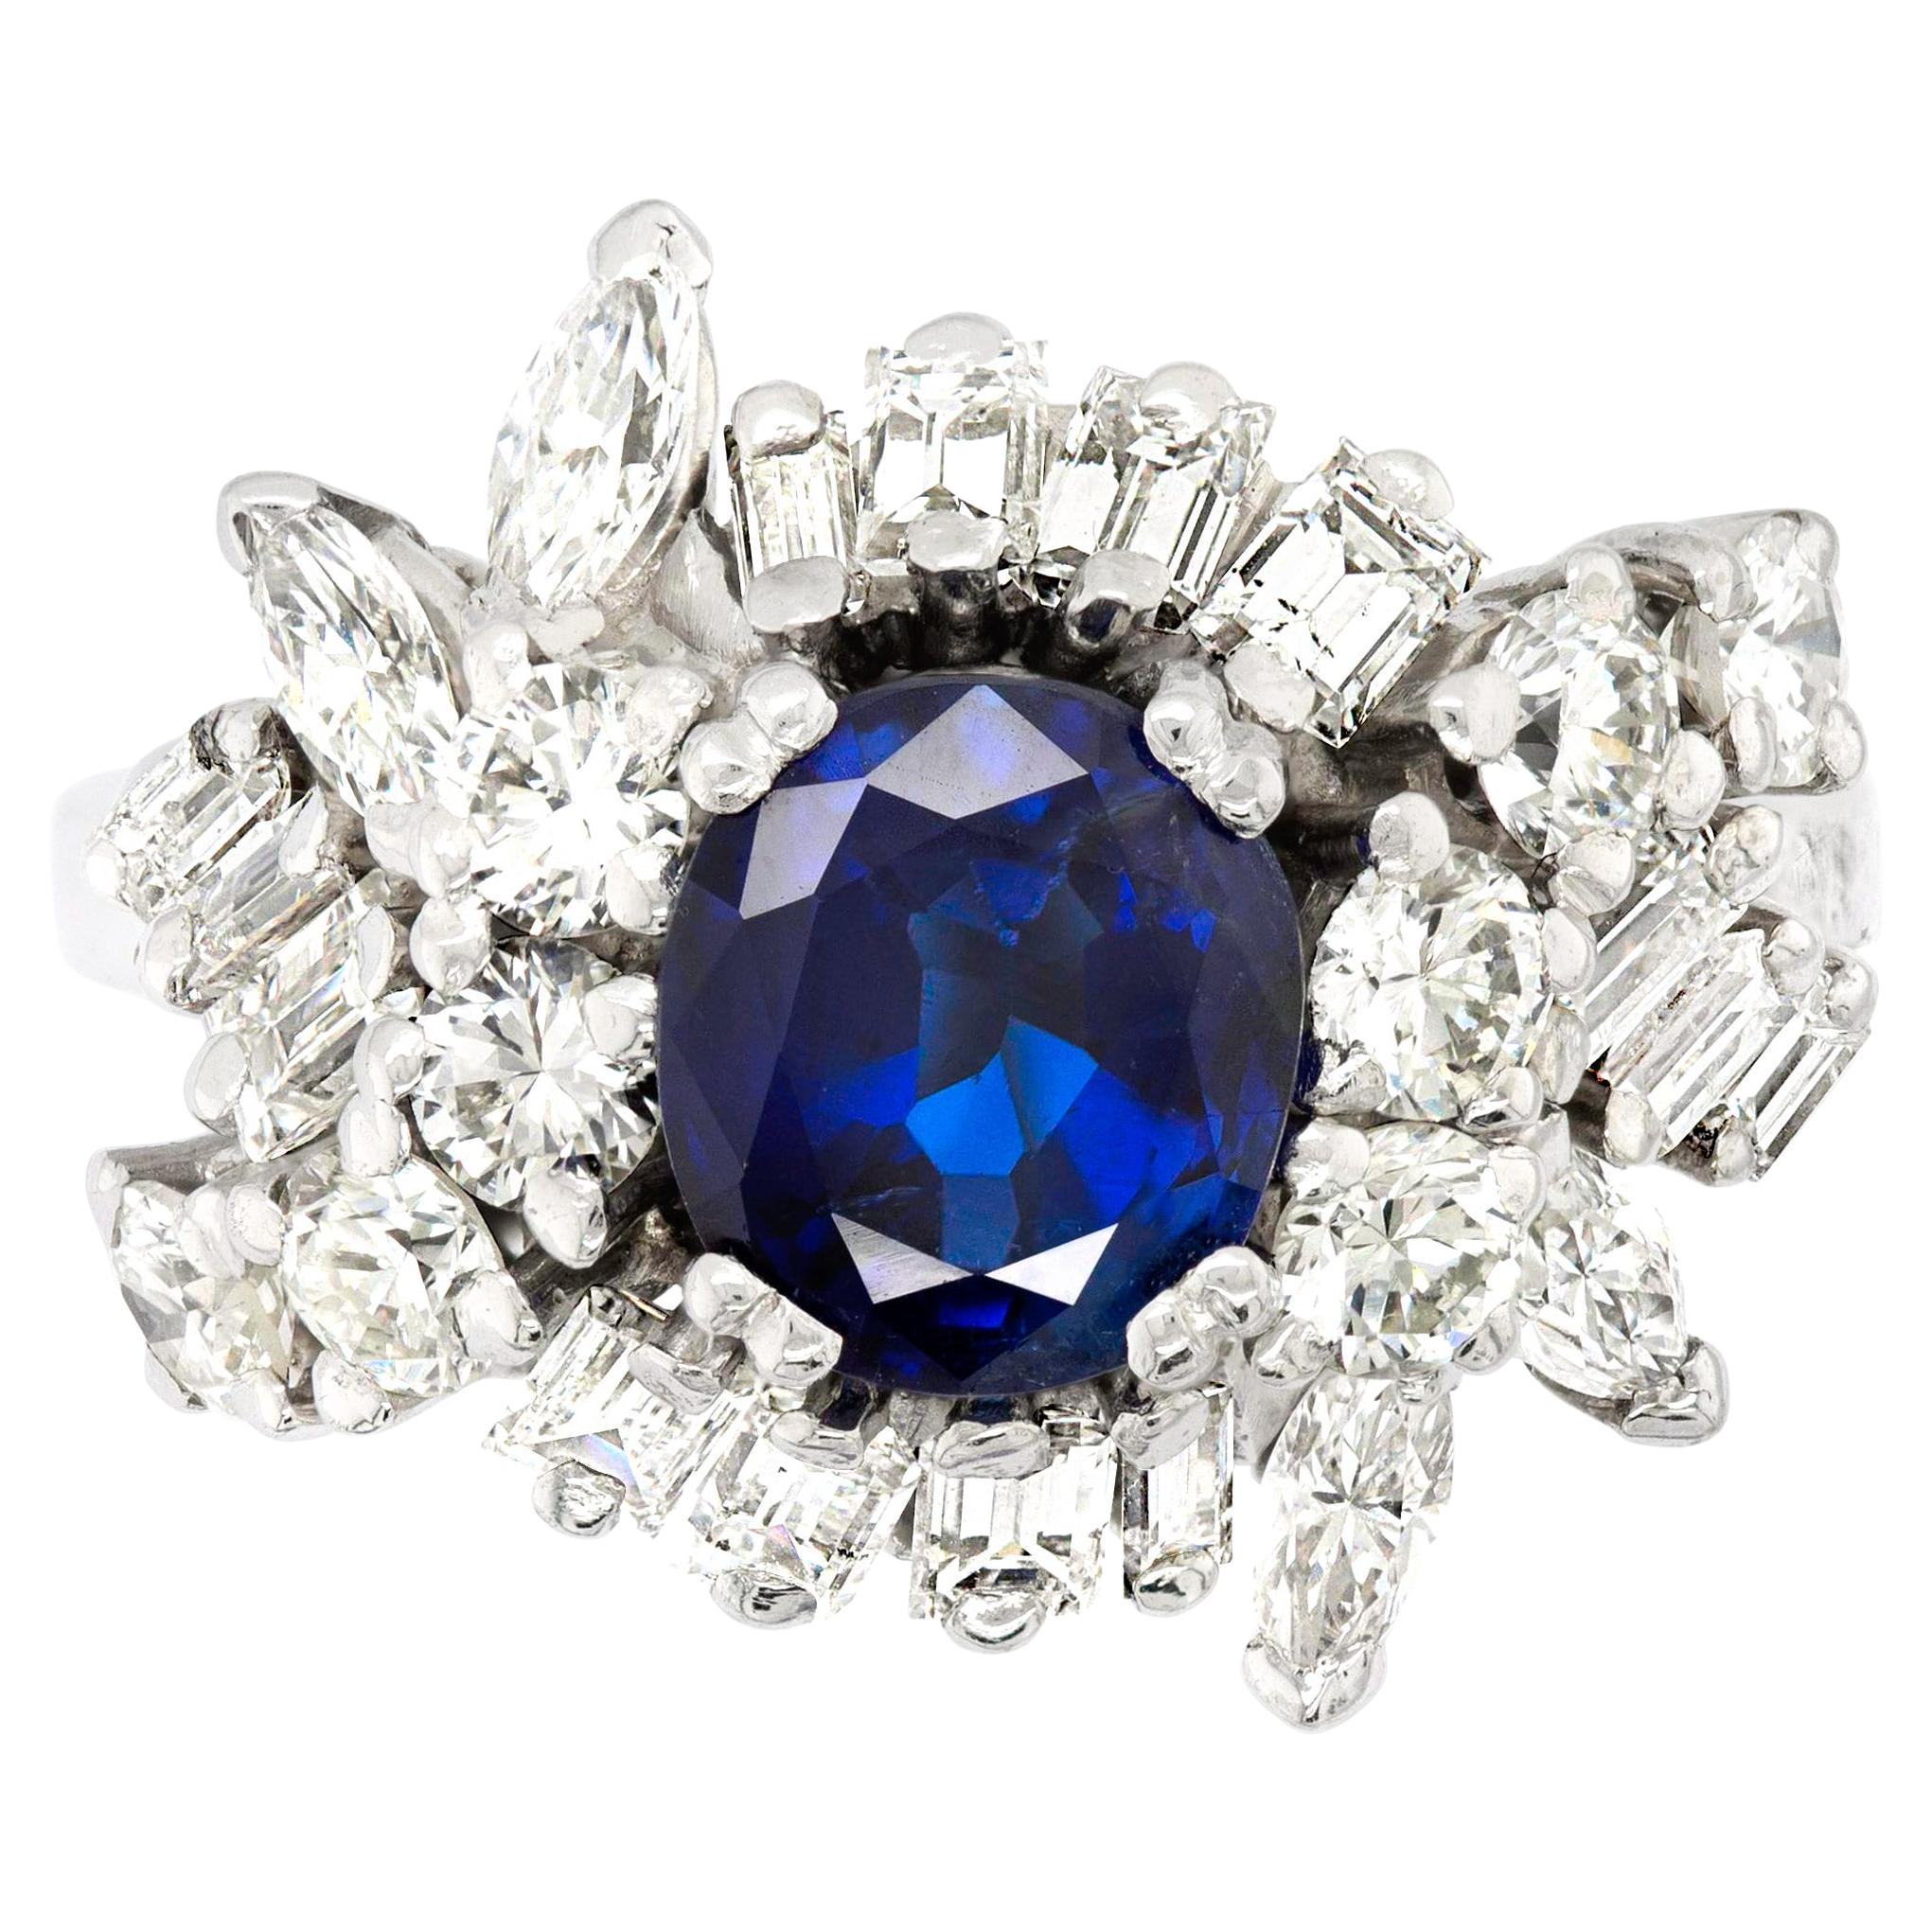 Vintage 2.02 Ct. Burma Sapphire and Diamond Cluster Cocktail Ring GIA For Sale